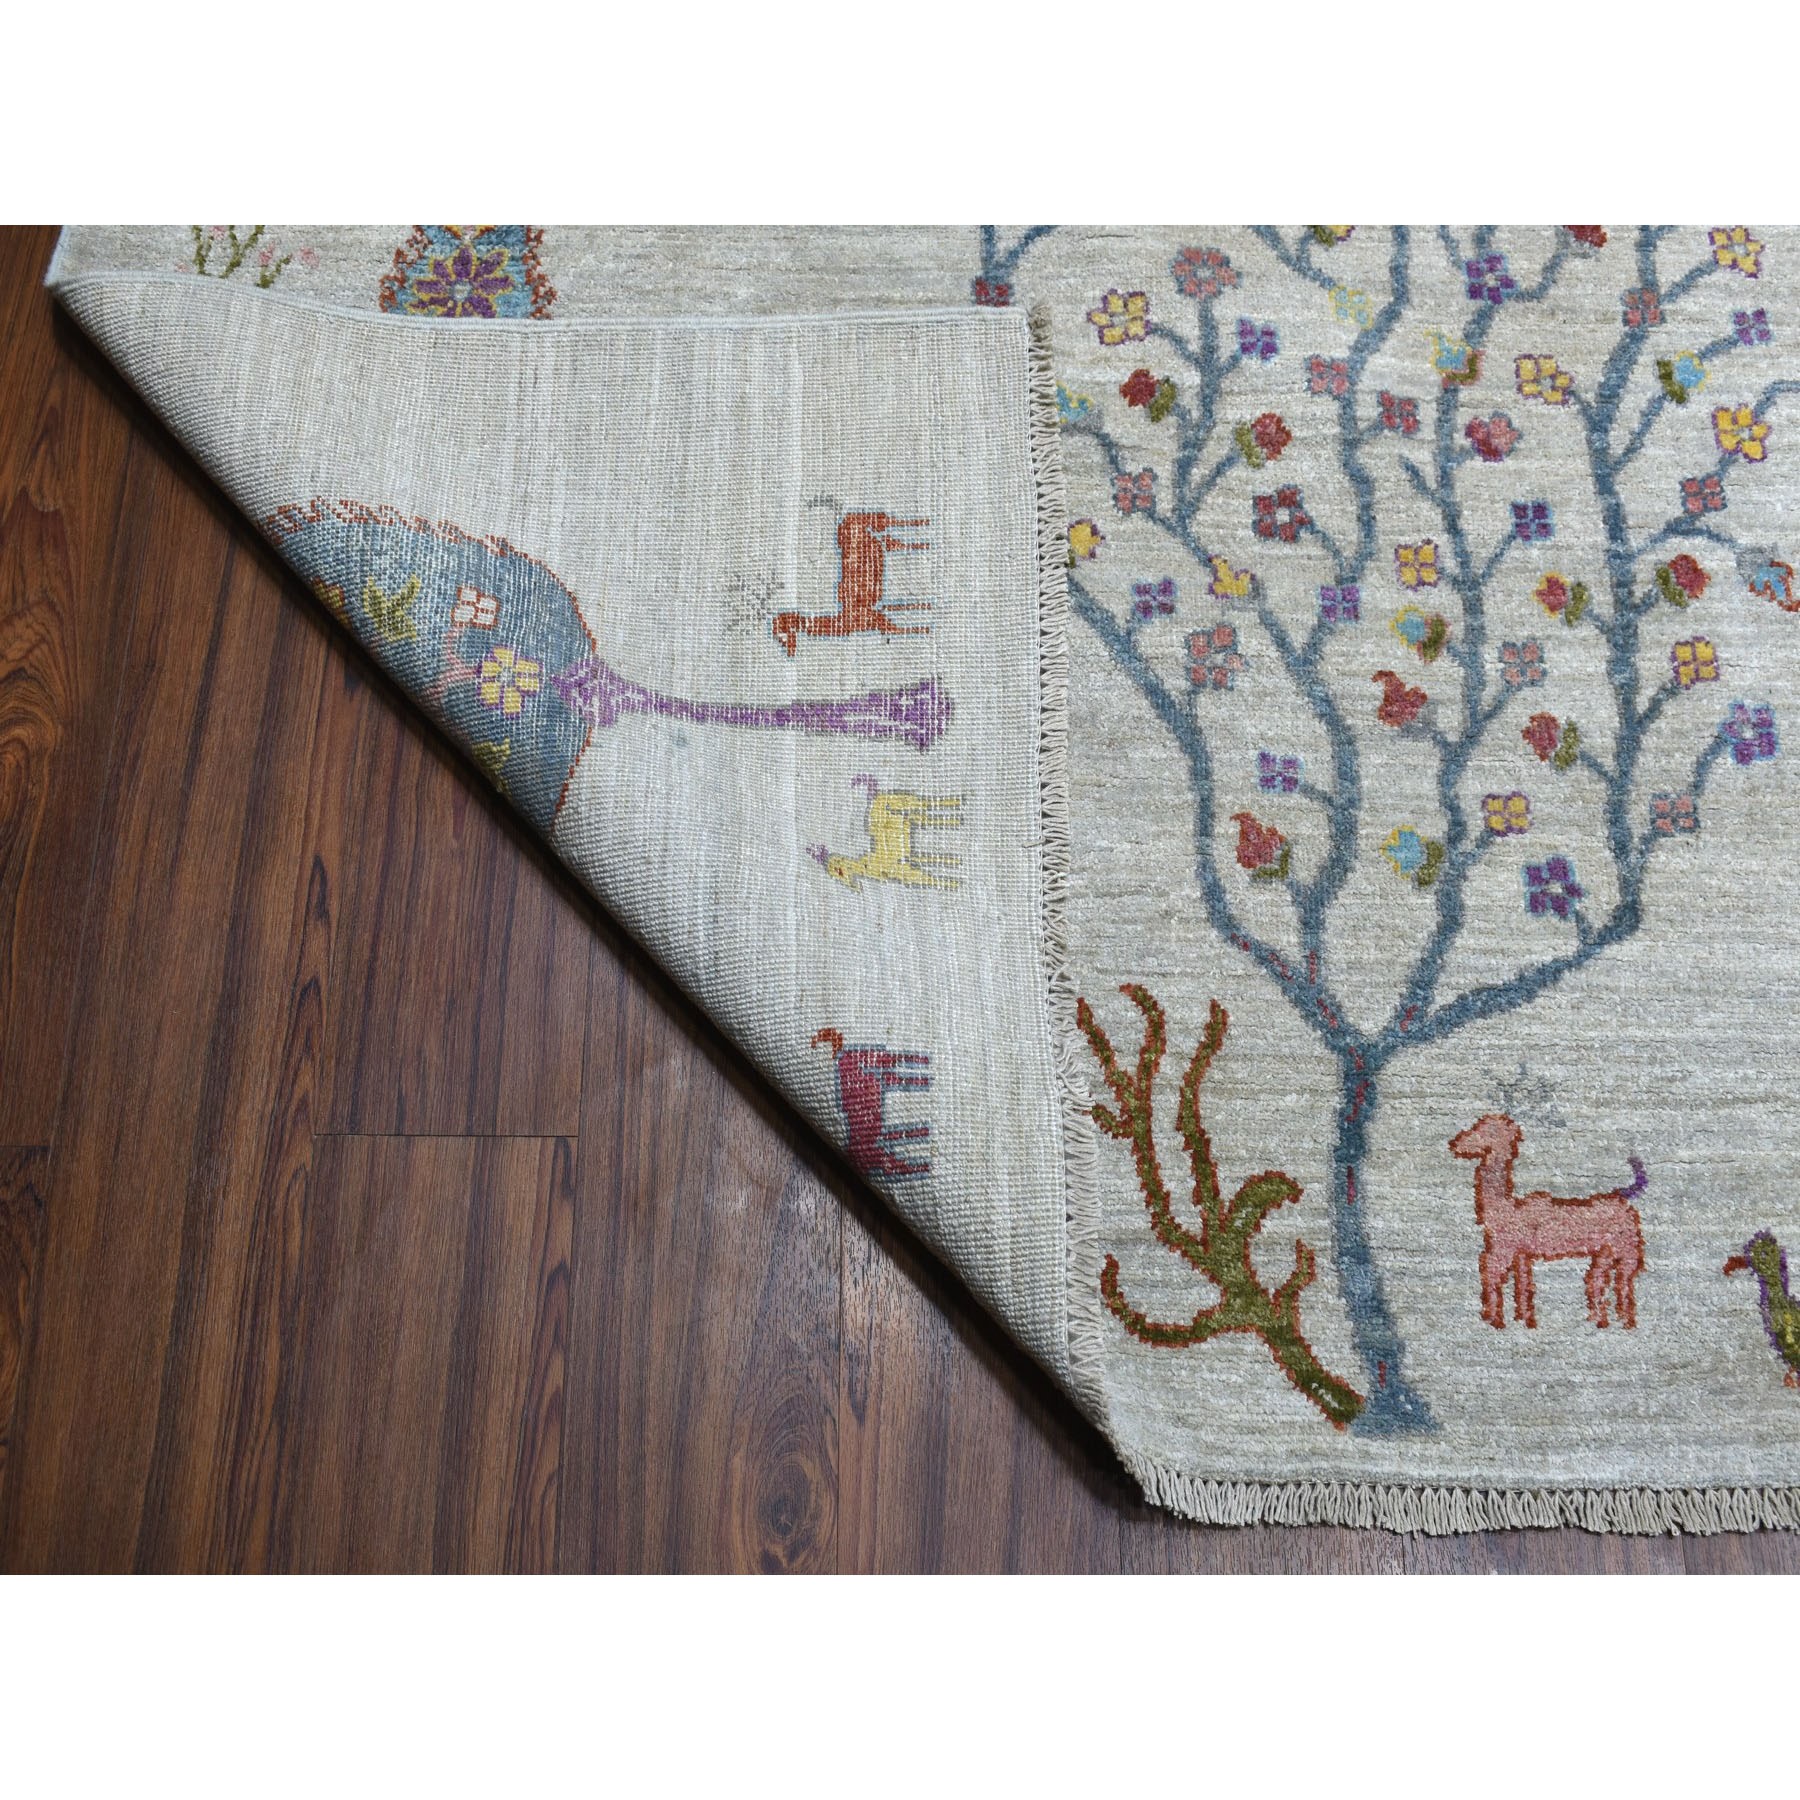 11'7"x14'8" Oversized Folk Art Willow And Cypress Tree Design Peshawar With Pop Of Color Hand Woven Oriental Rug 